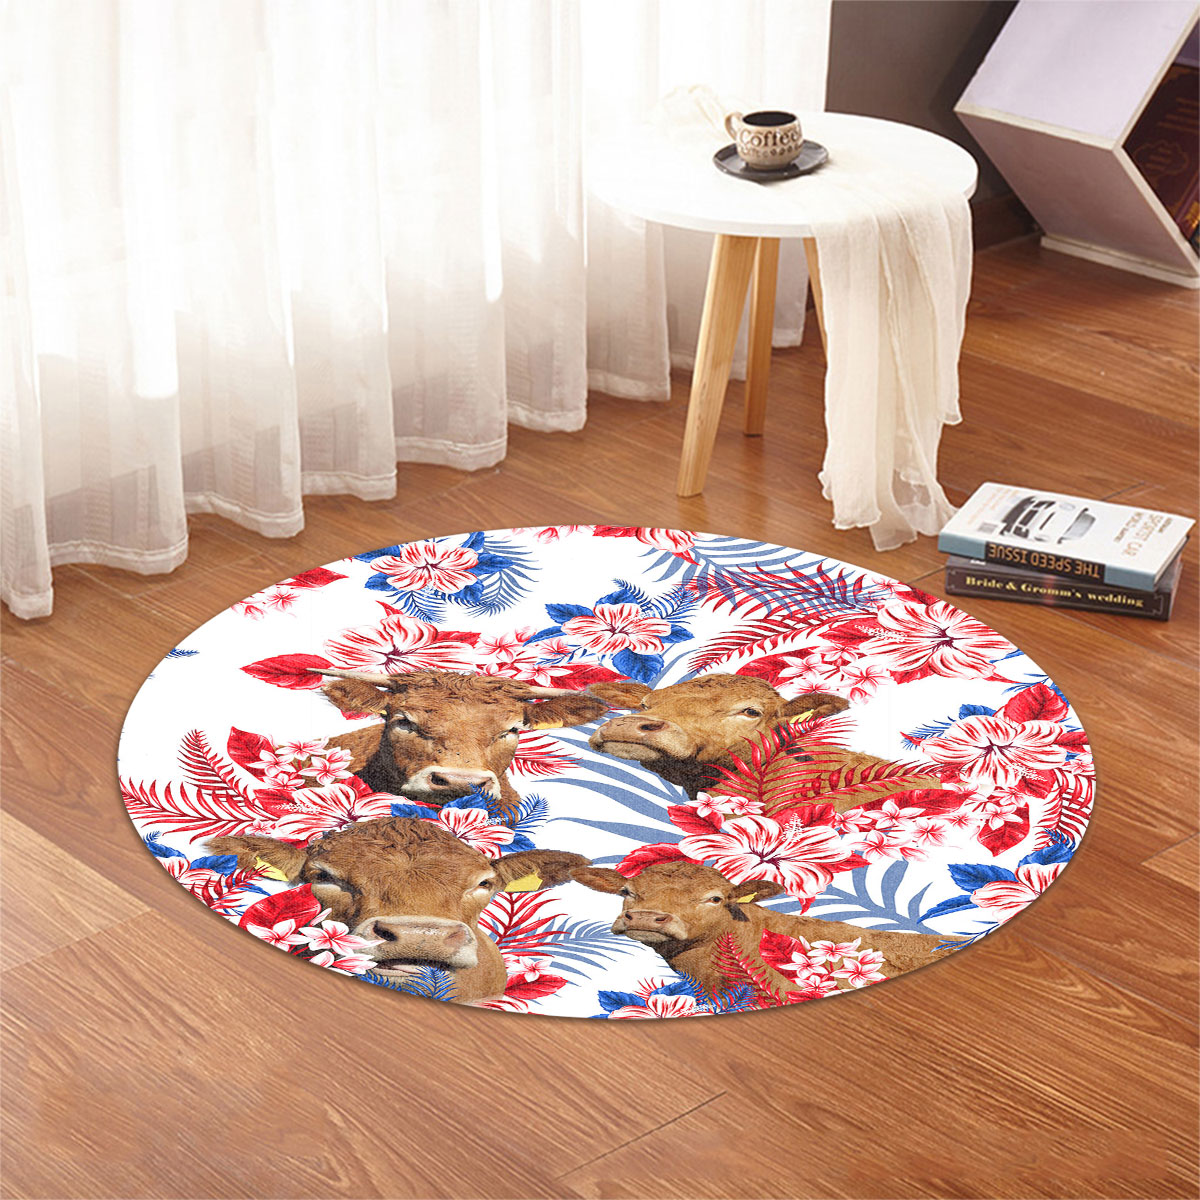 Limousin Red Hibiscus Flower Round Rug